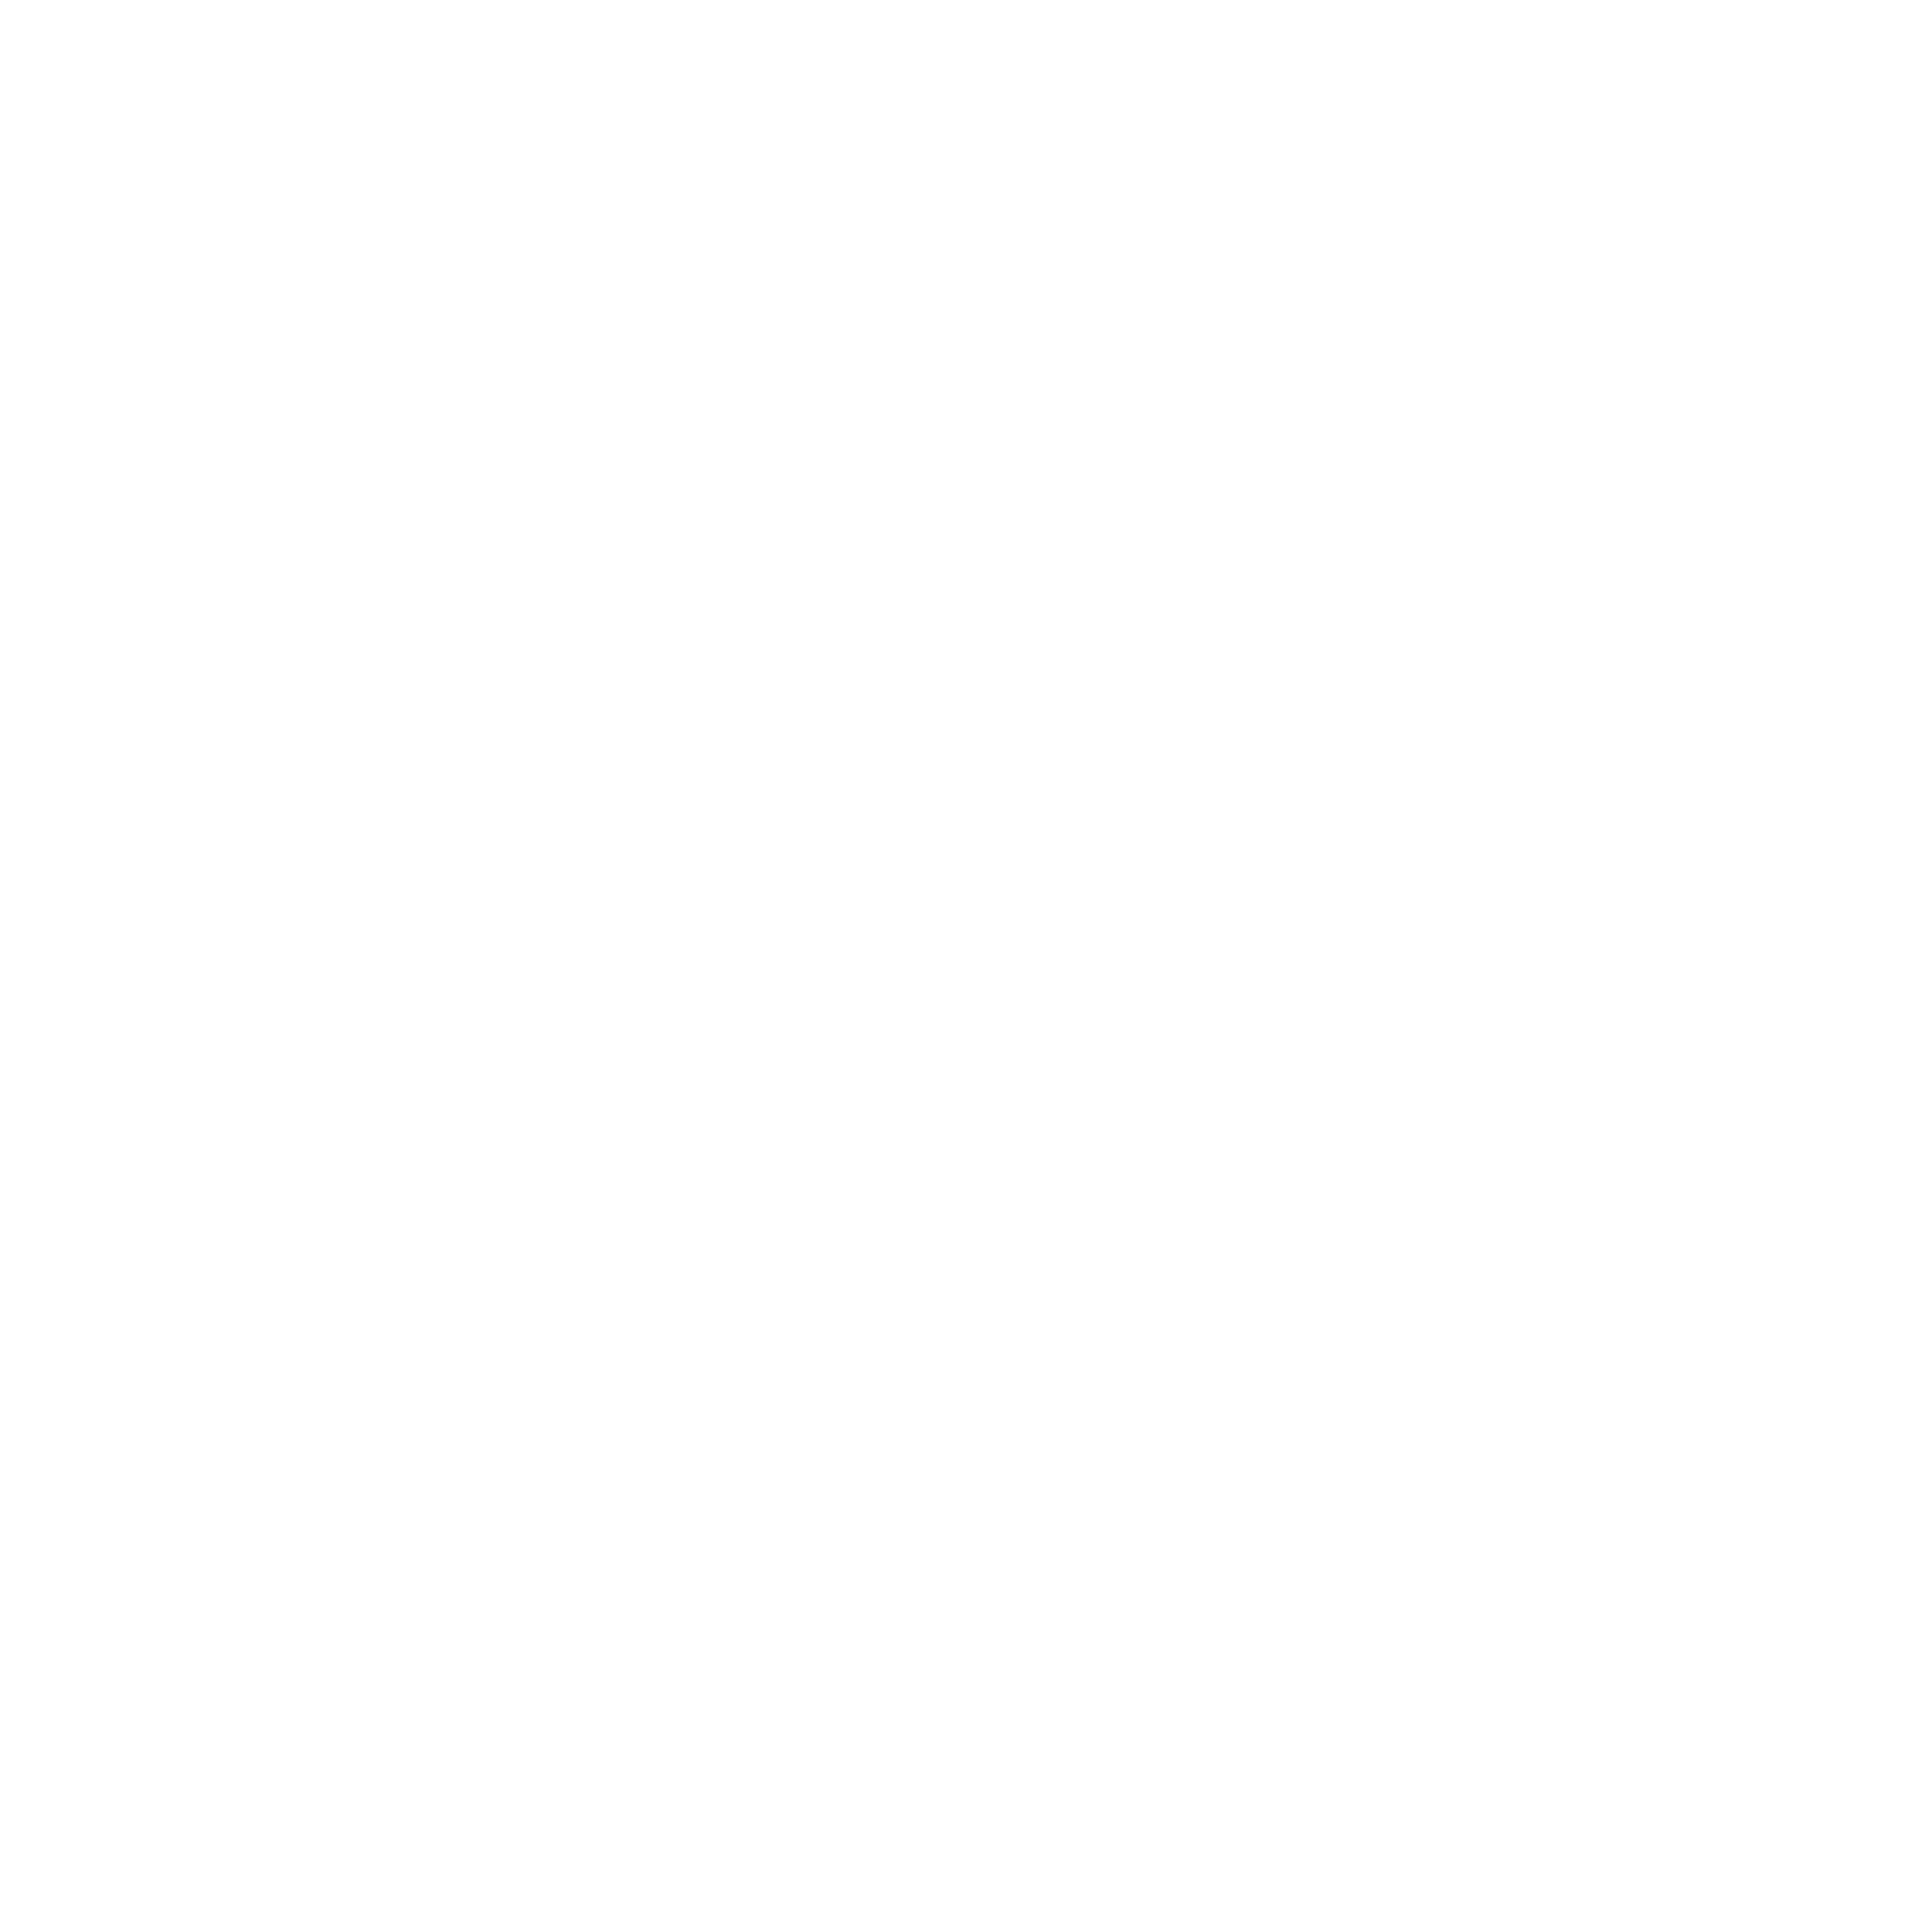 Pirates of the Arrland